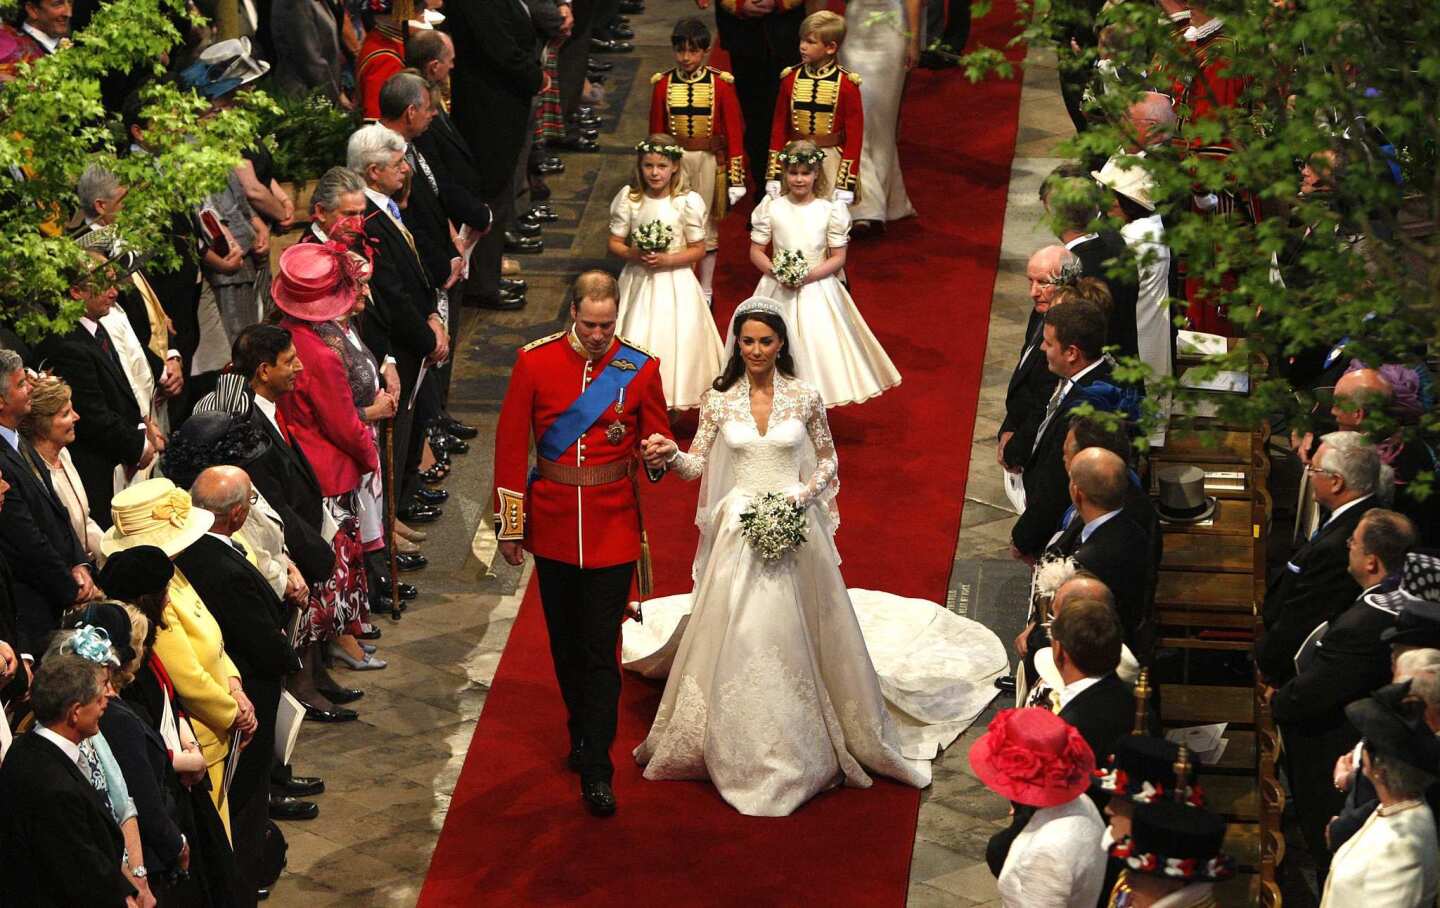 Unforgettable on TV: Kate and William get married